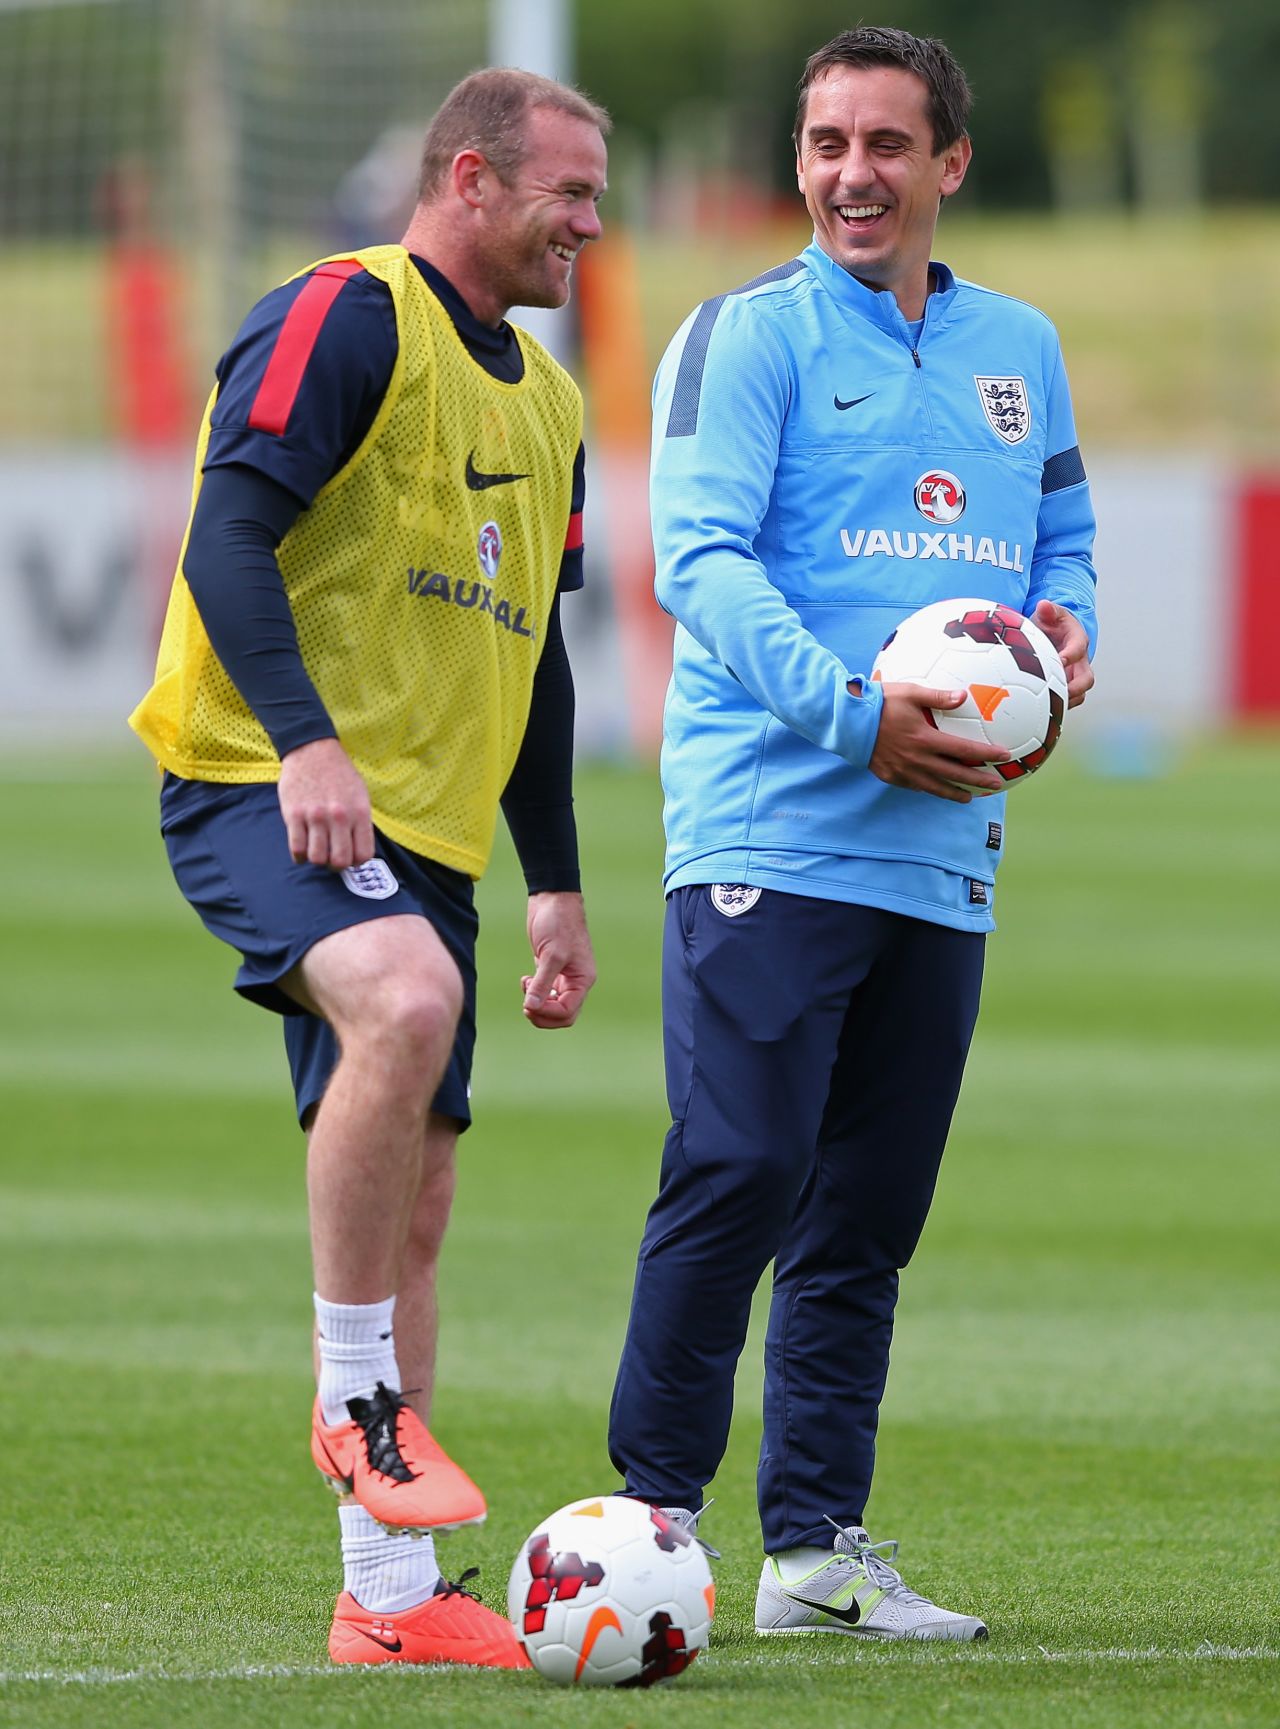 After retiring in 2011, Neville accepted a job as part of England coach Roy Hodgson's staff. He will combine his role as Valencia coach with his involvement with the national side, who are preparing for next year's European Championships.